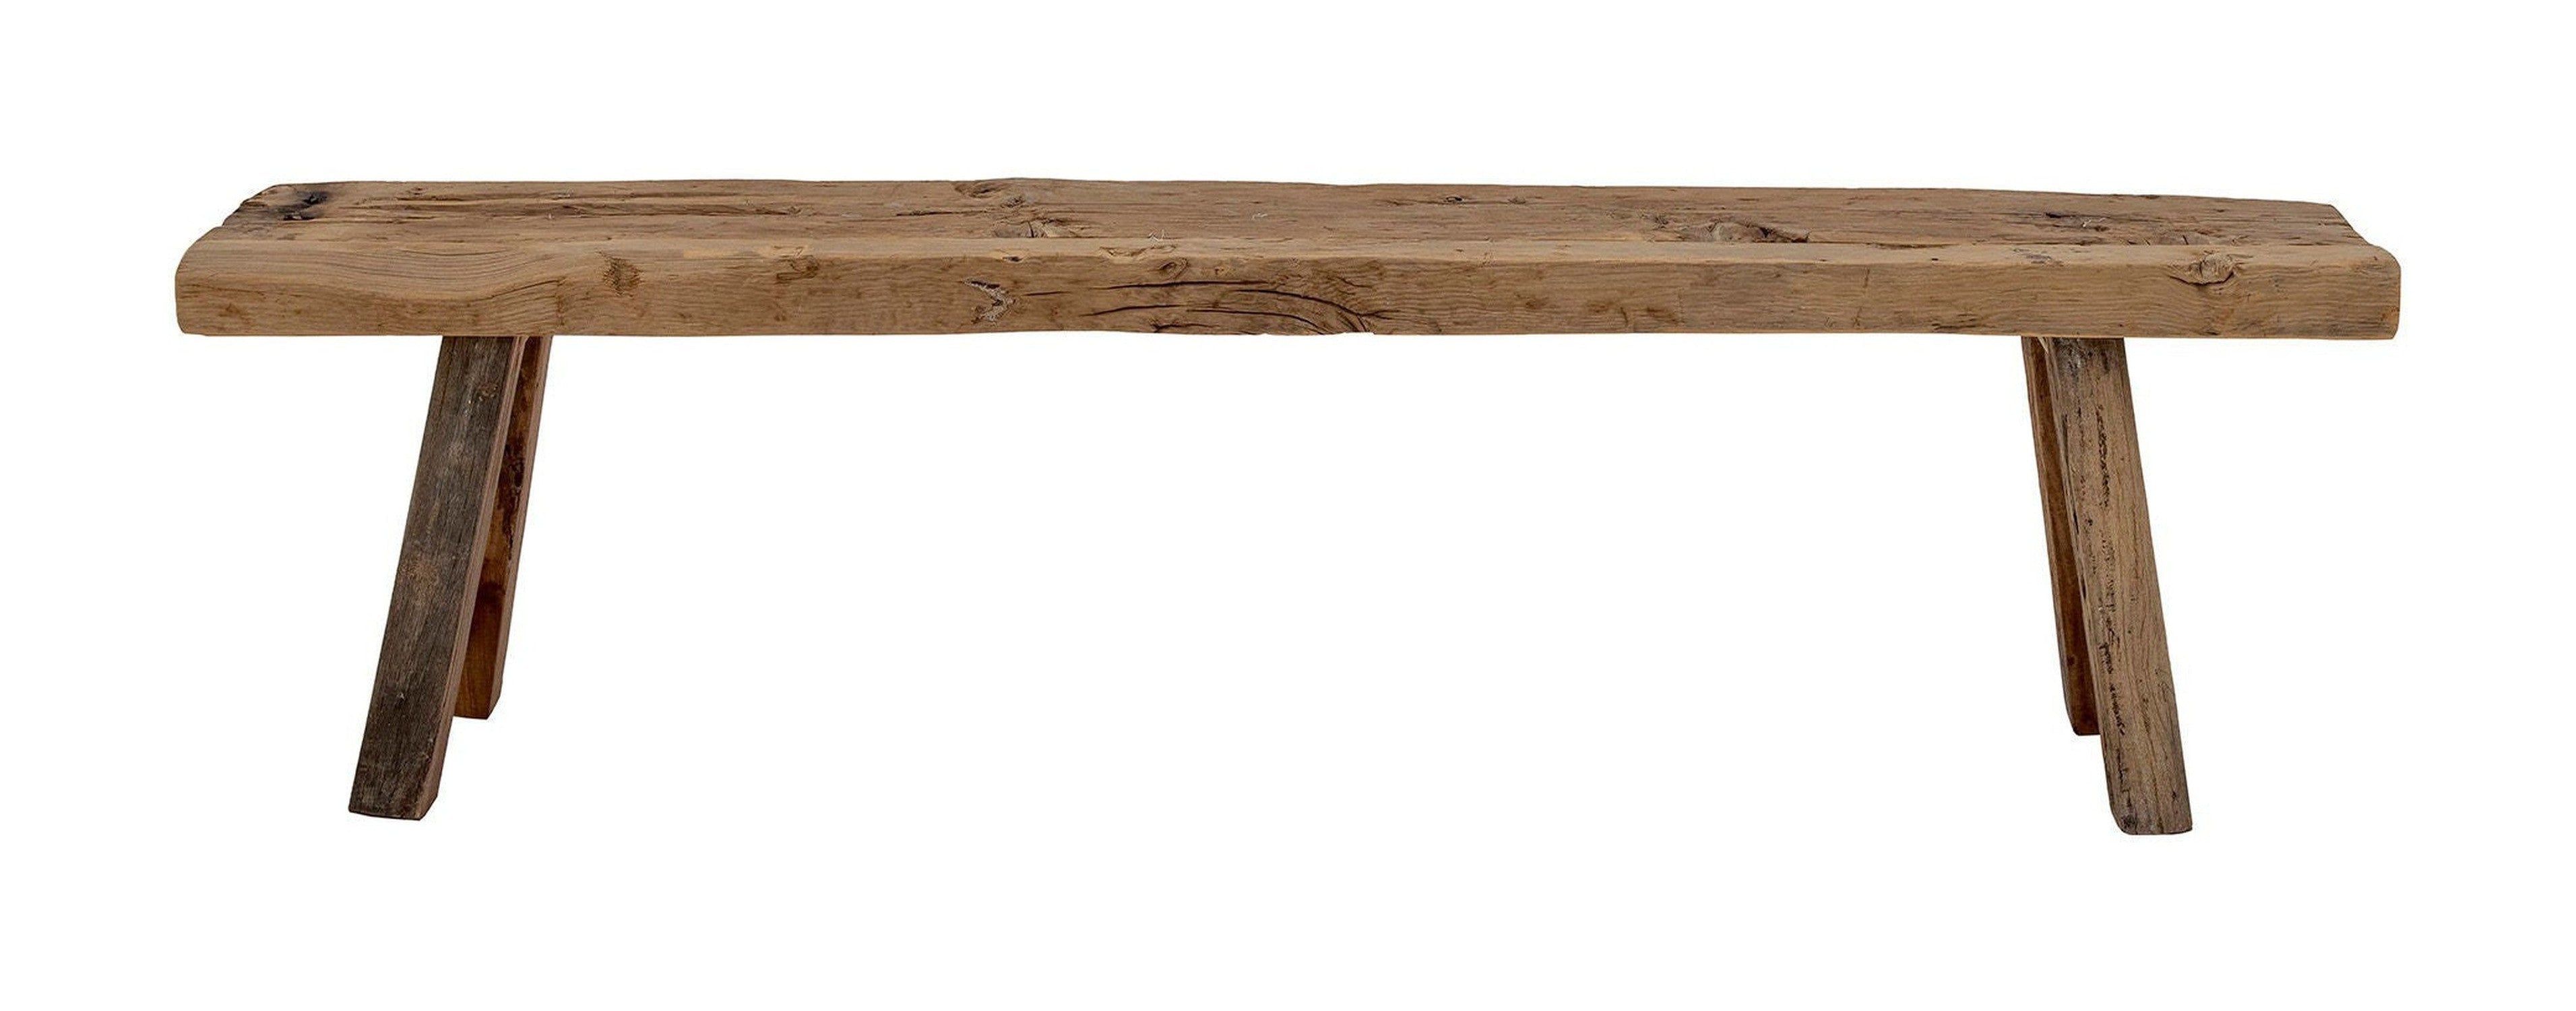 Creative Collection Pascal Bench, Nature, Reclaimed Wood